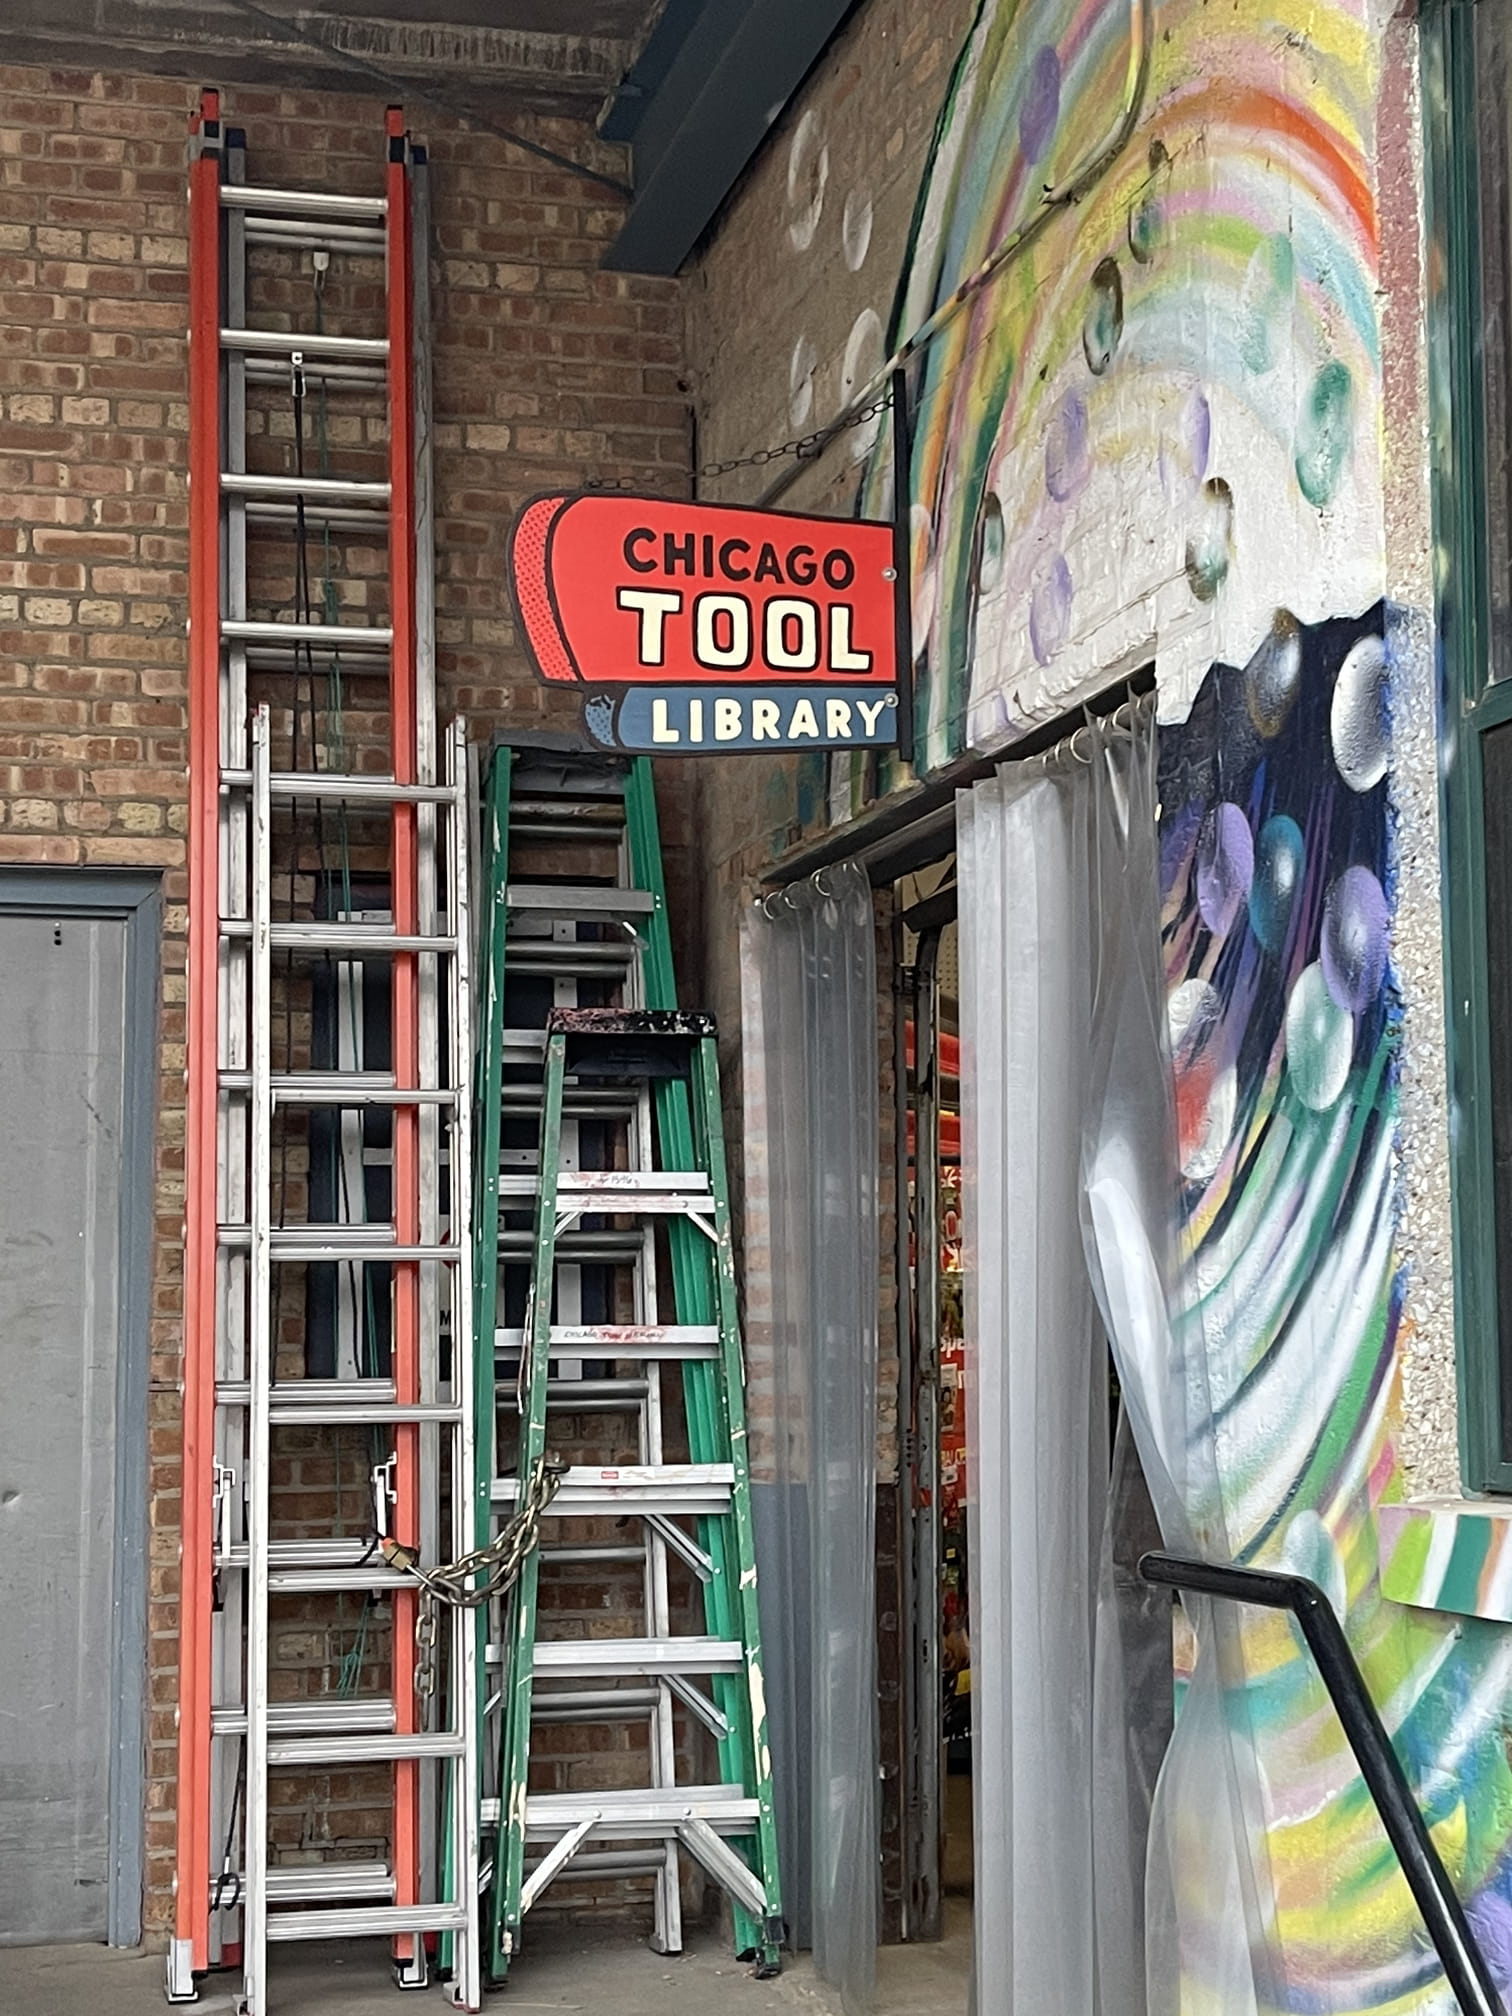 Chicago tool library